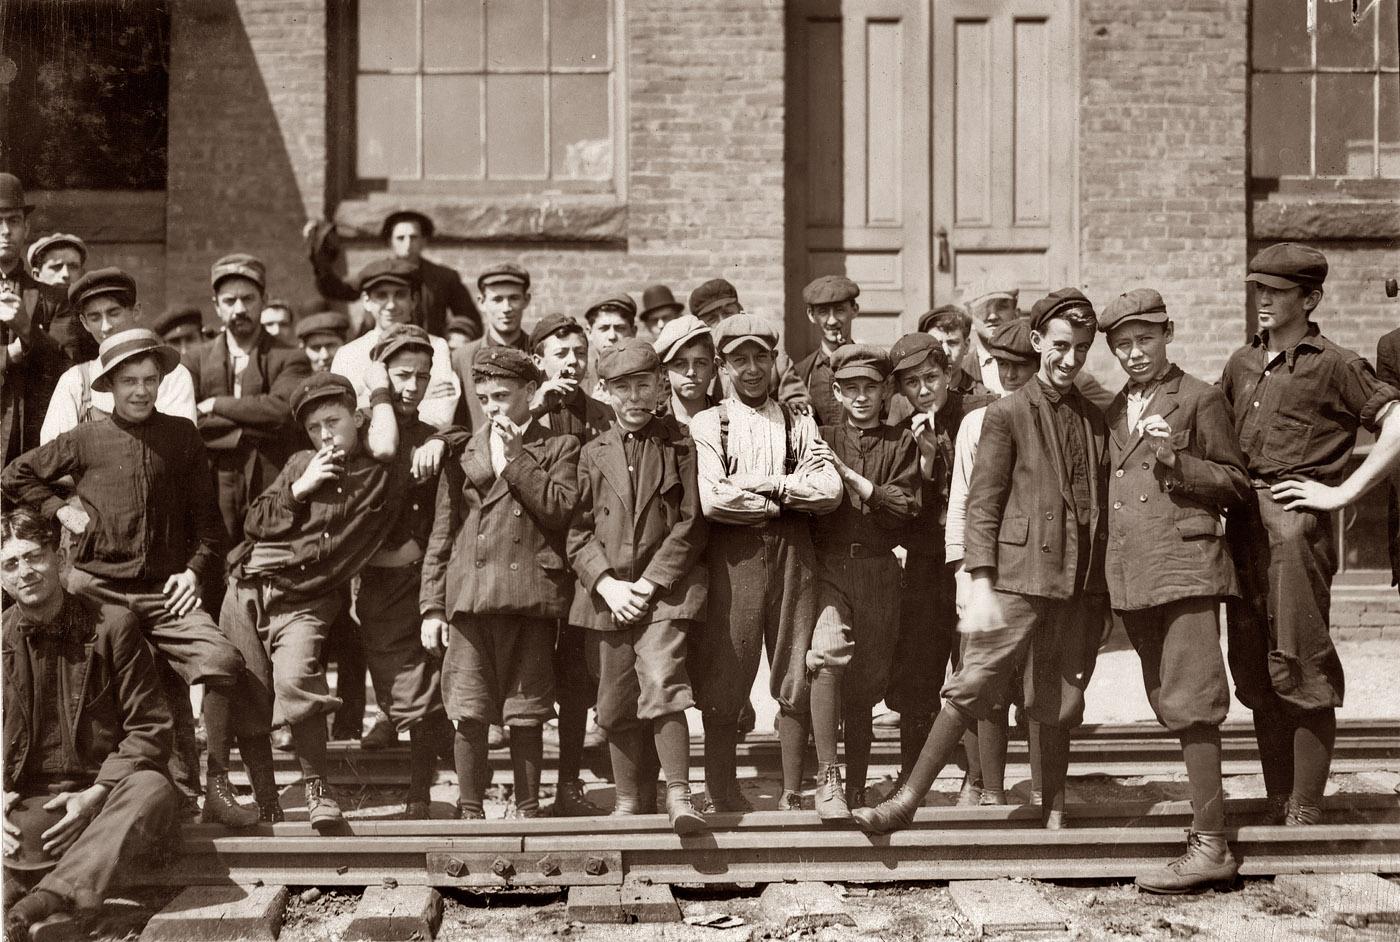 Young workers in front of Indian Mfg. Co., Indian Orchard, Massachusetts. September 1911. Photo by Lewis Wickes Hine. View full size.